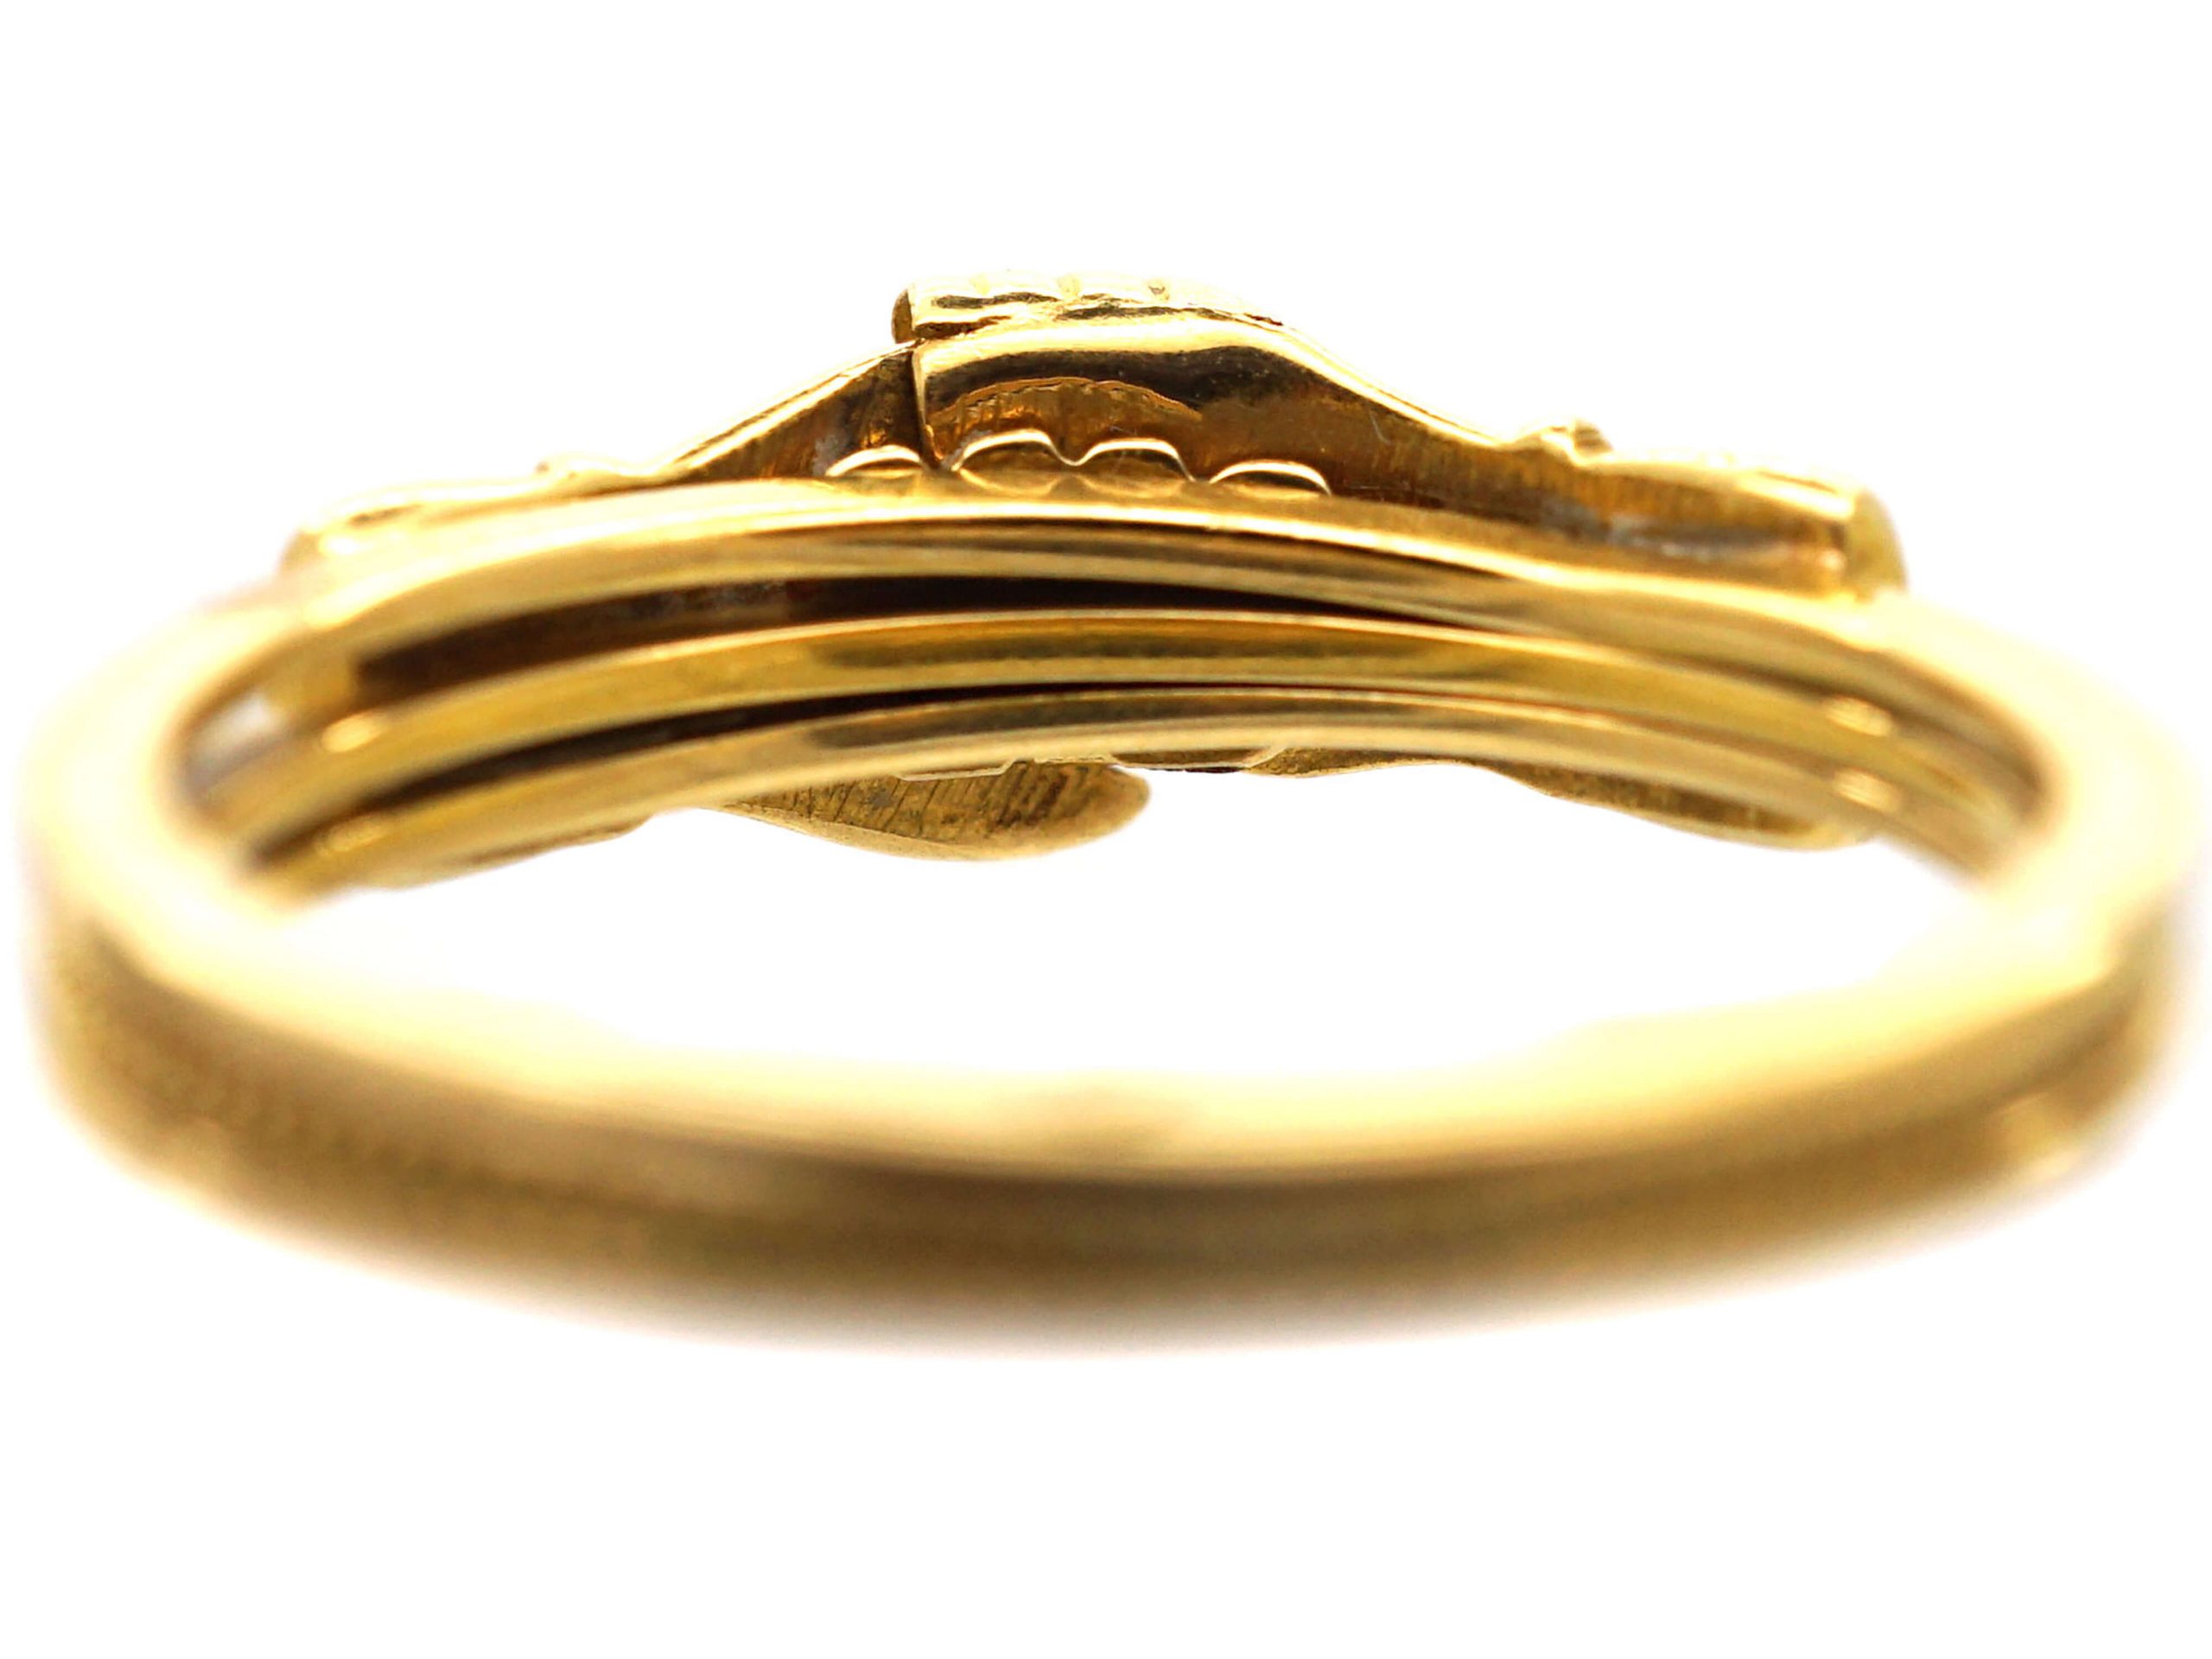 Victorian 18ct Gold Fede Ring (989R) | The Antique Jewellery Company